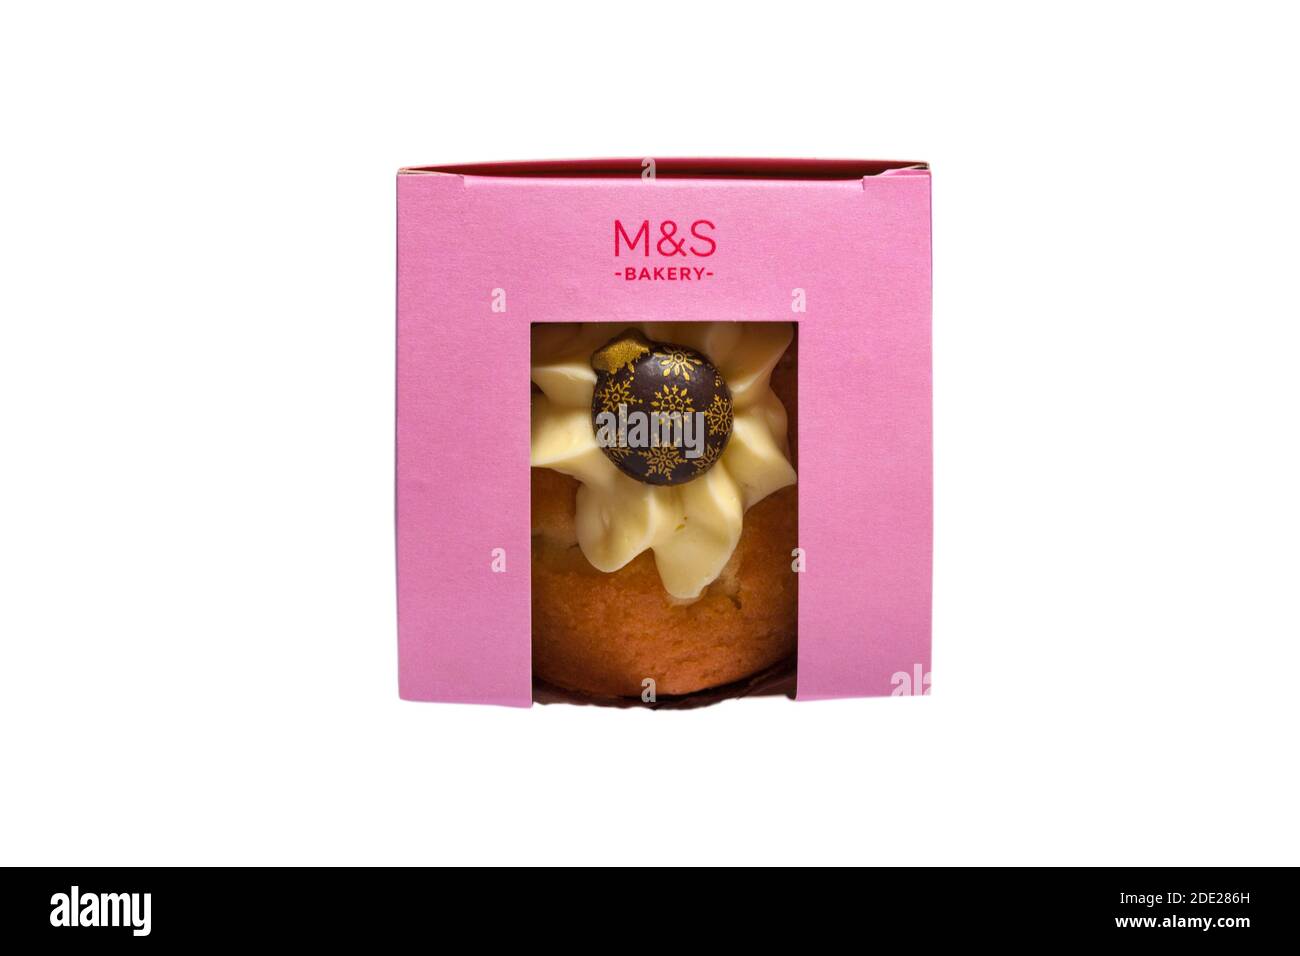 Christmas bauble muffin cake from M&S in-store bakery in box isolated on white background - Bauble Victoria Sponge Muffin Stock Photo